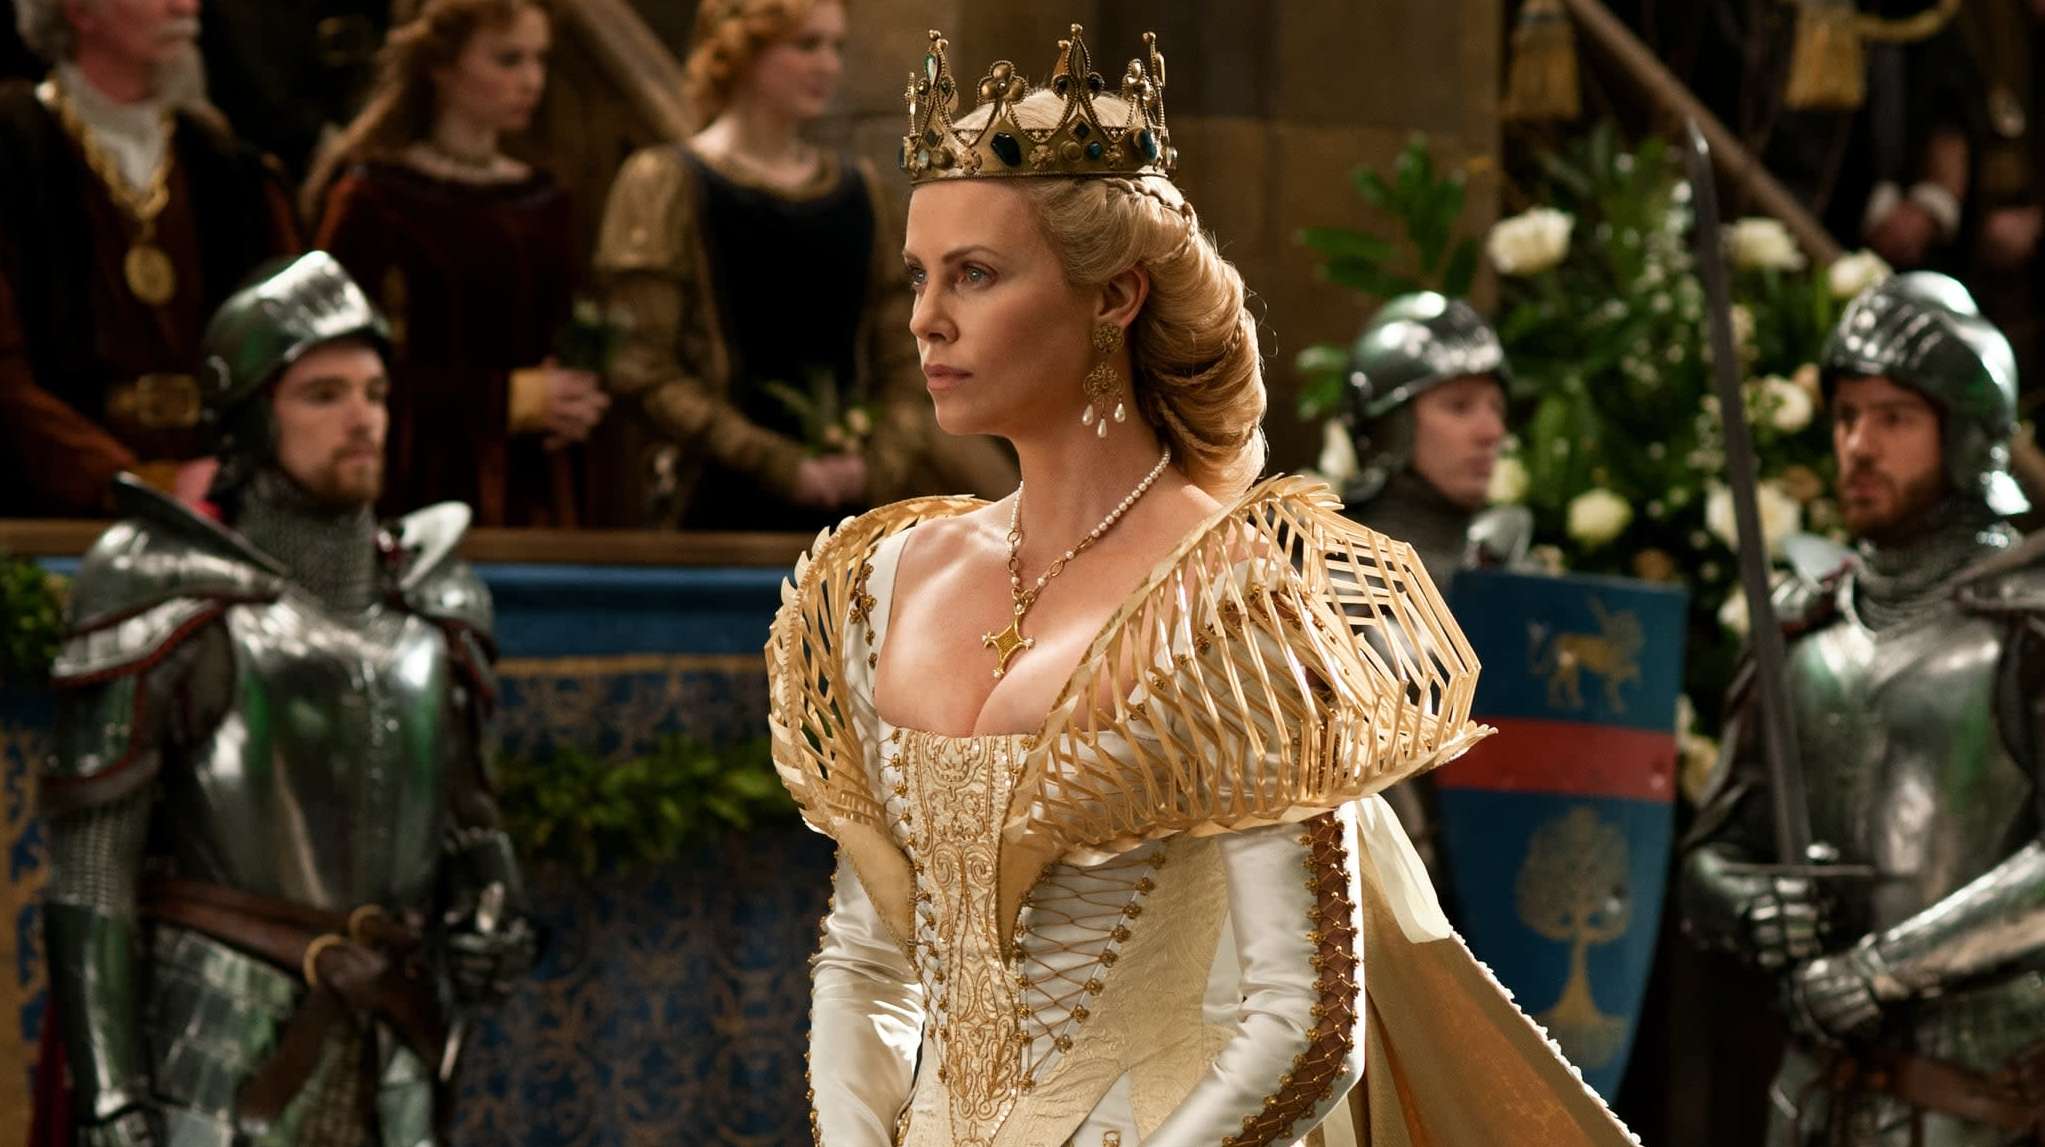 Charlize Theron may have shoulder pads for days, but that's still way too medieval.  (Image: Universal Pictures)